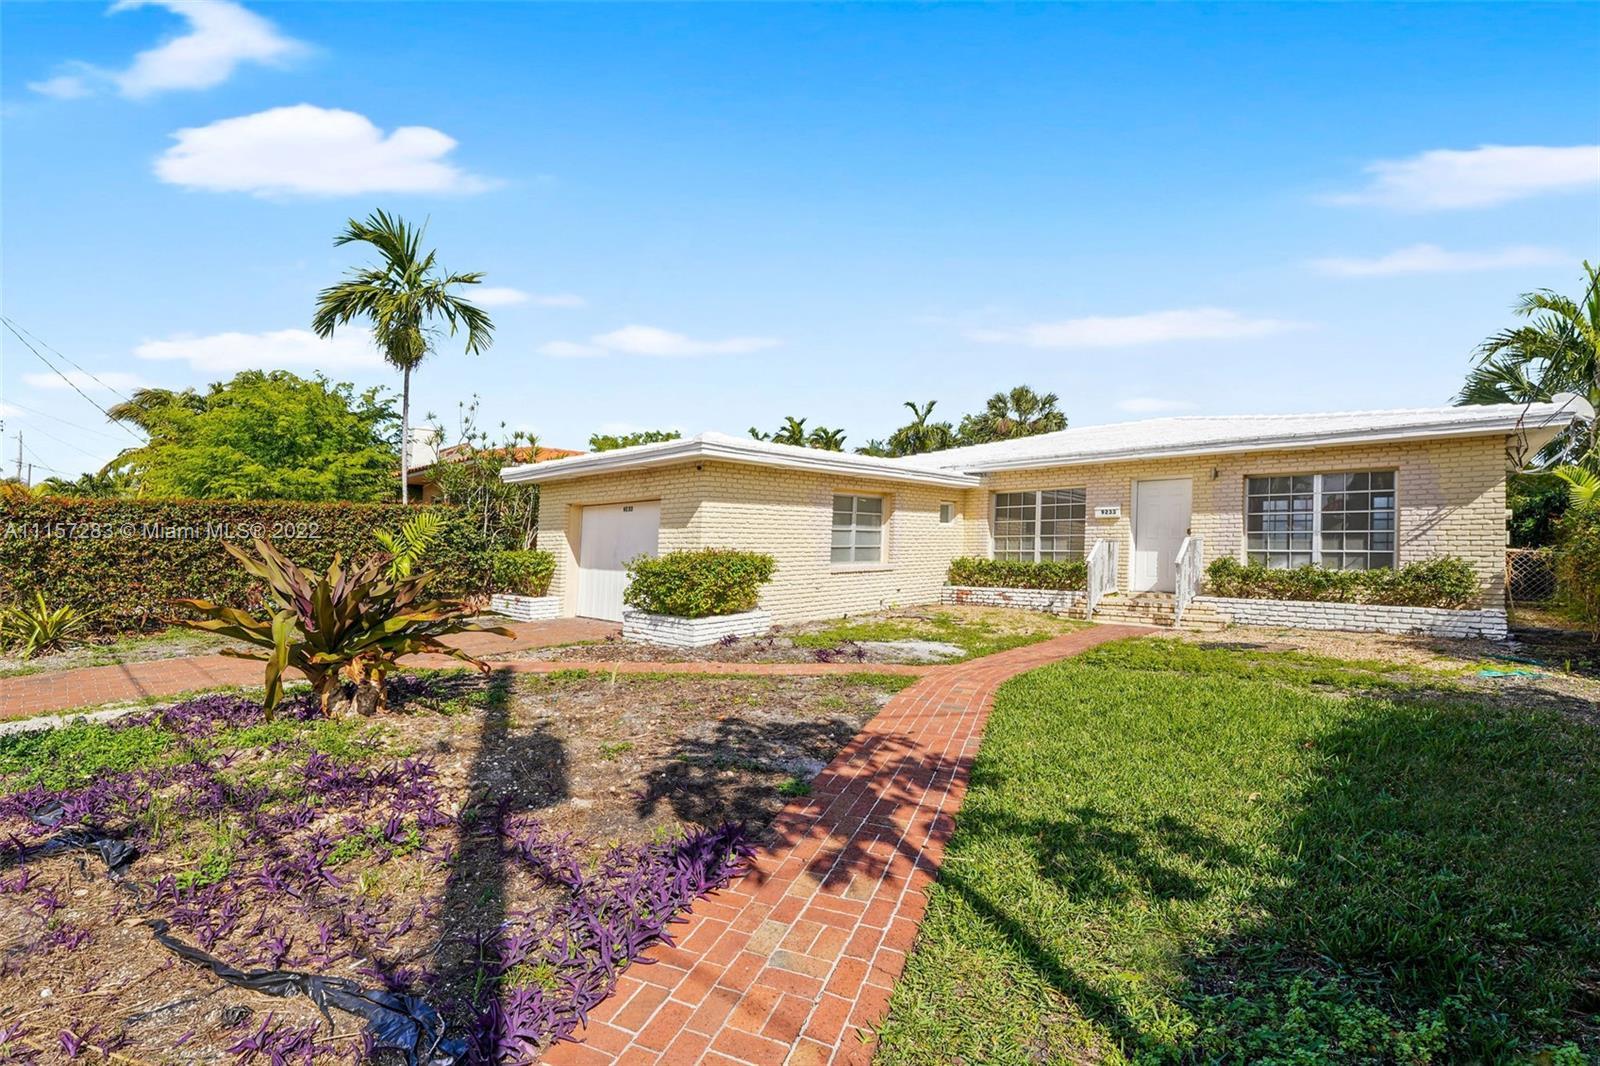 Looking for your forever home? Welcome to Surfside, one of the most sought after locations in Miami,